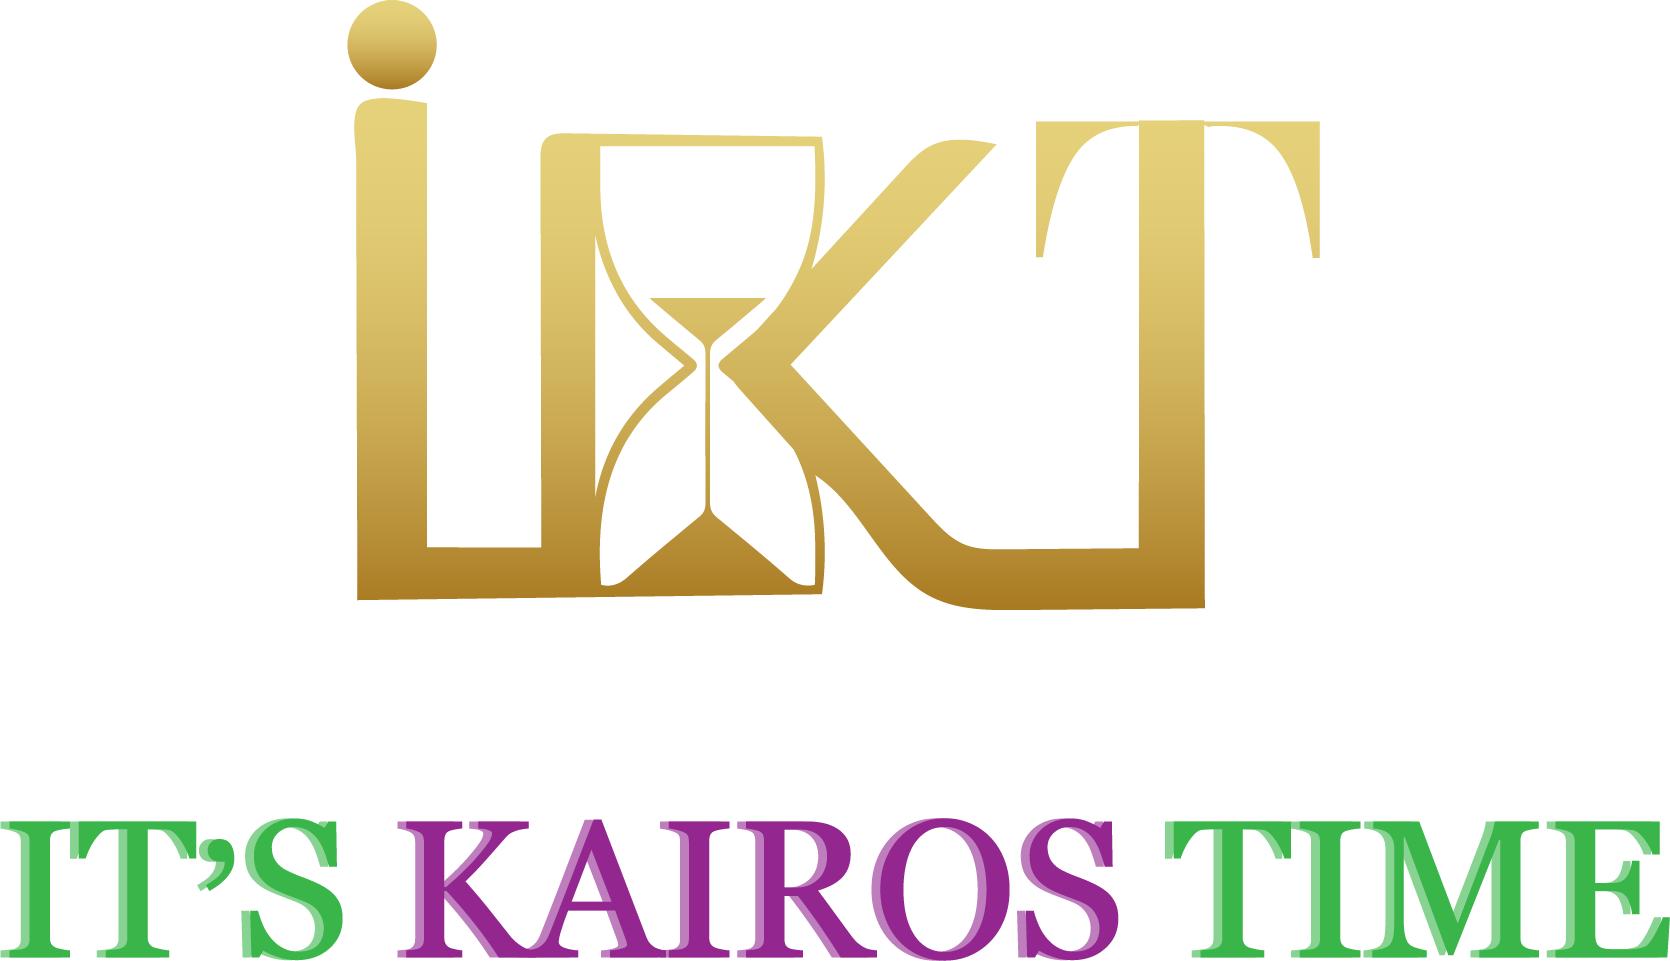 A gold colored logo with the letters lkt